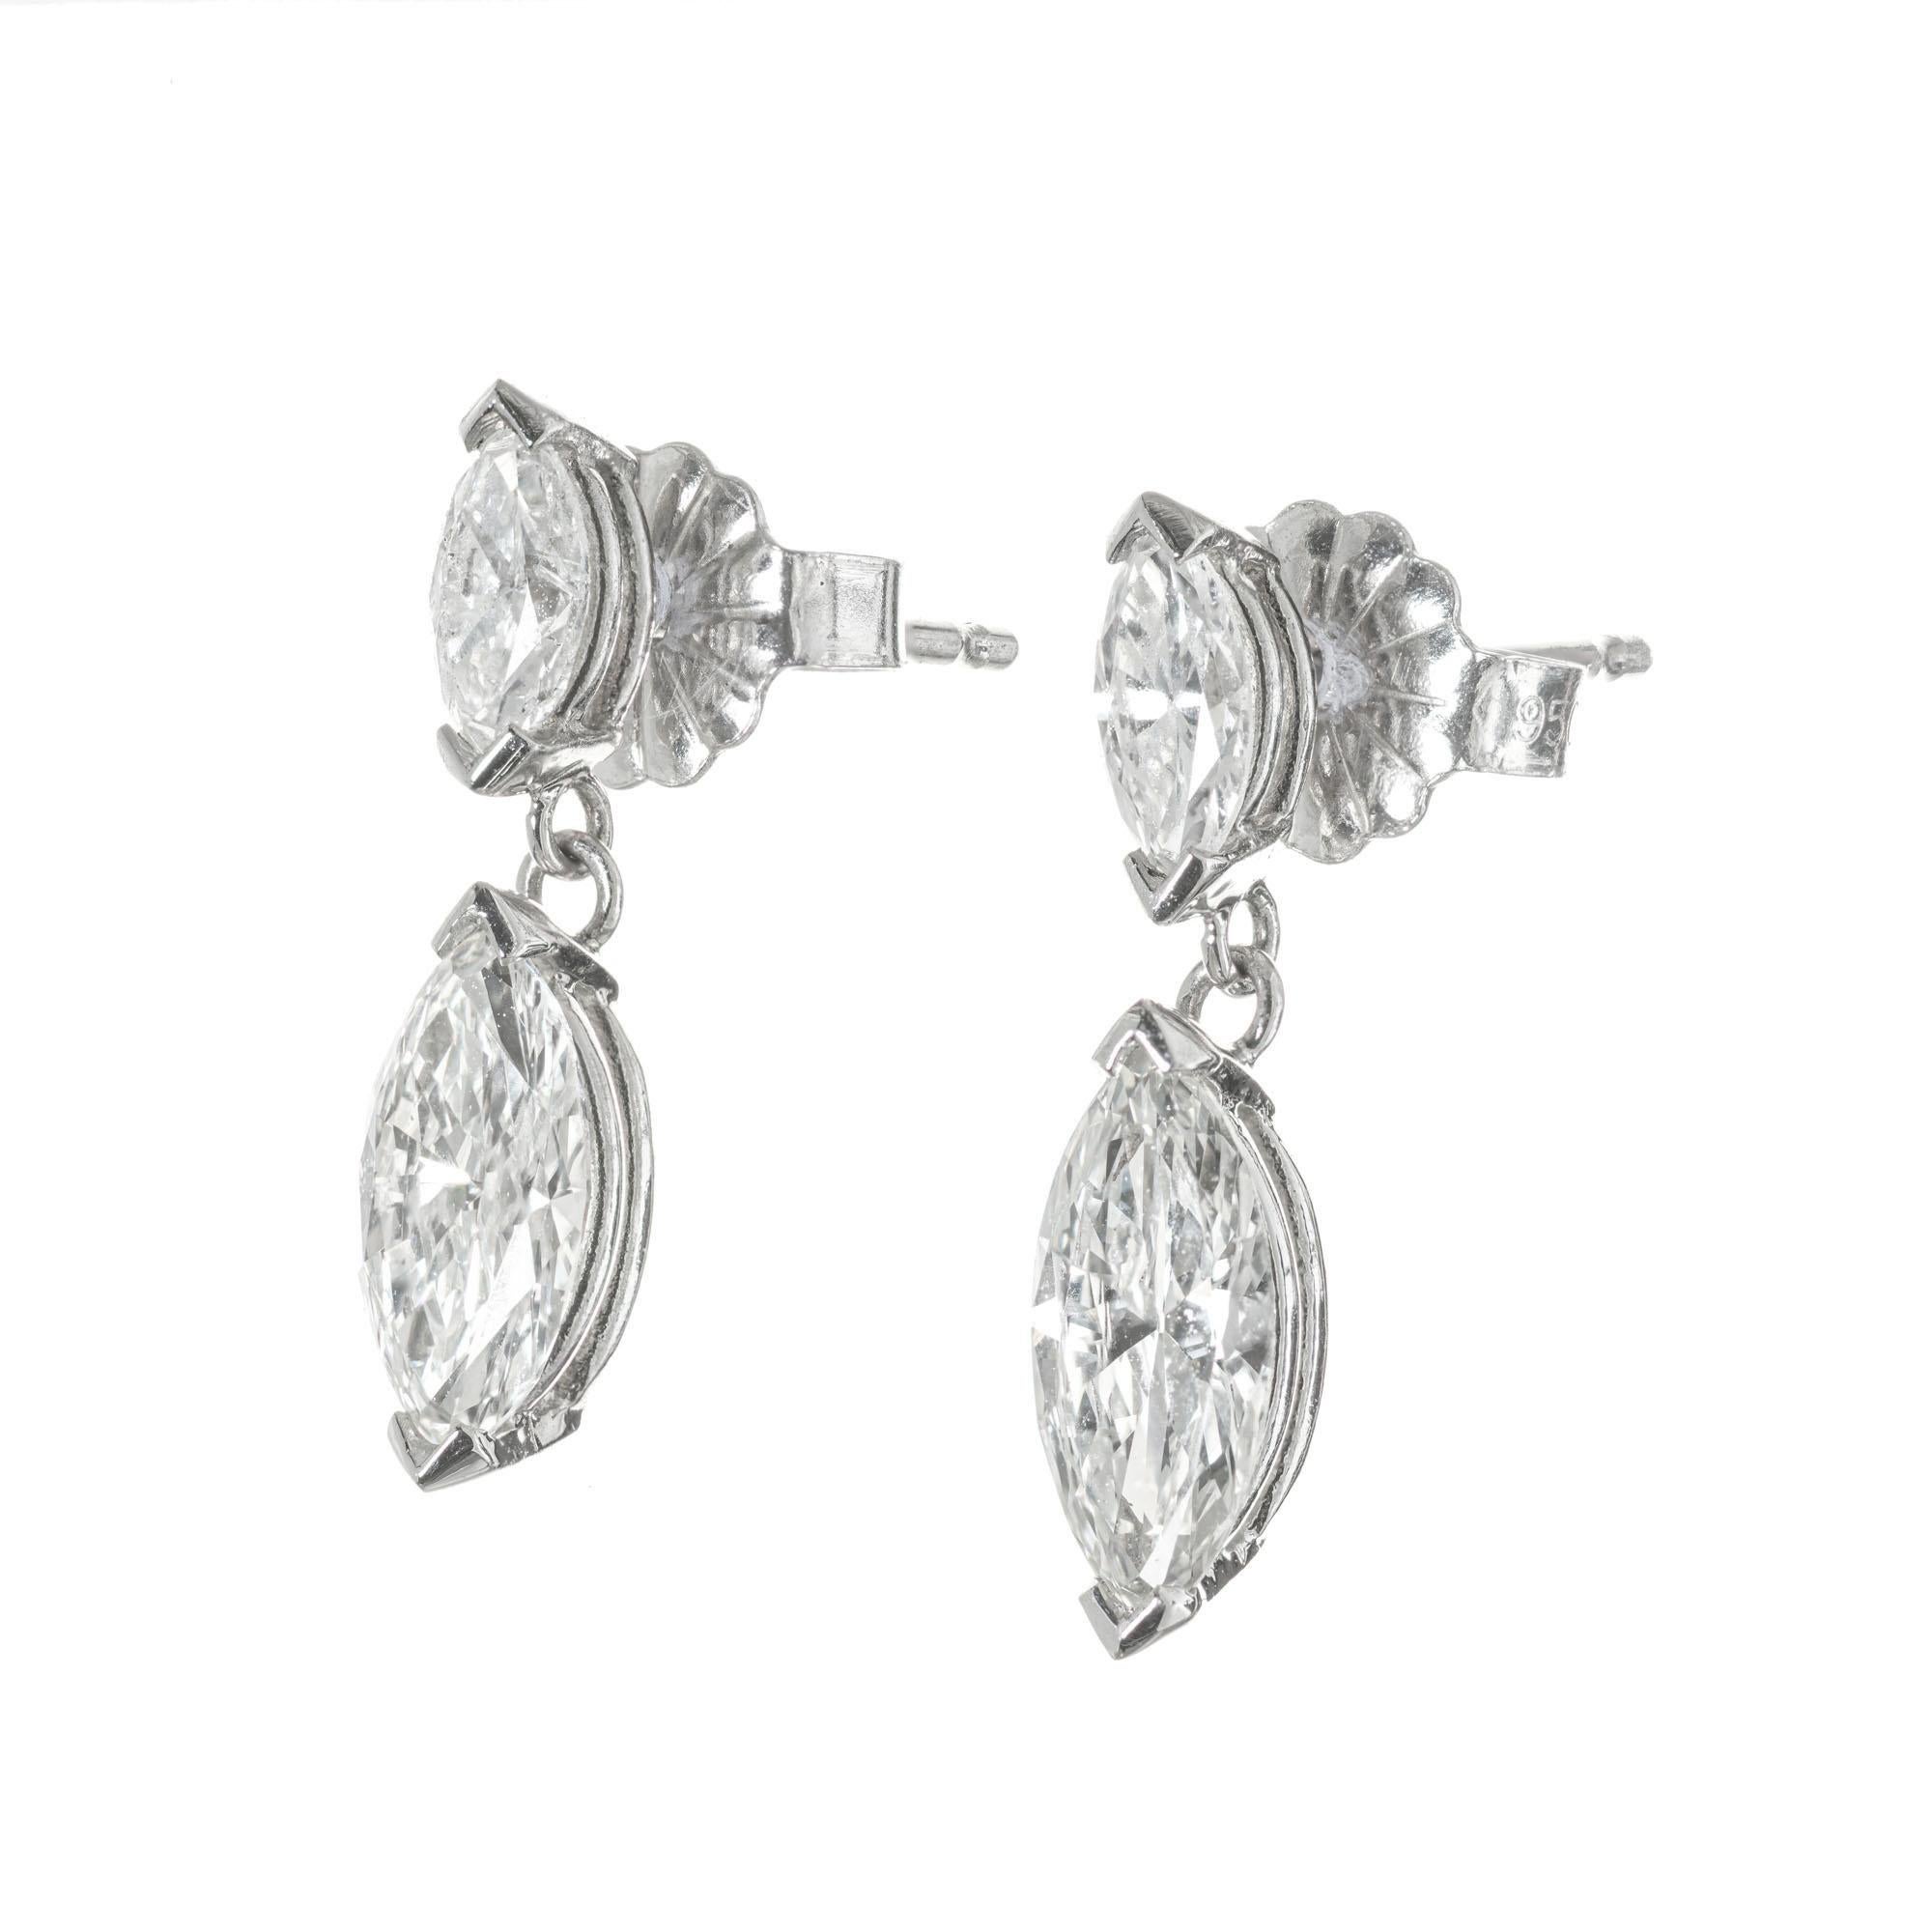 GIA Certified diamond dangle earrings. 2 GIA certified marquise cut Dimond dangles with 2 marquise cut top diamonds, set in platinum,. Created in the Peter Suchy Workshop.  The stones are from a 1950's estate.

1 marquise cut diamond, I VS approx.